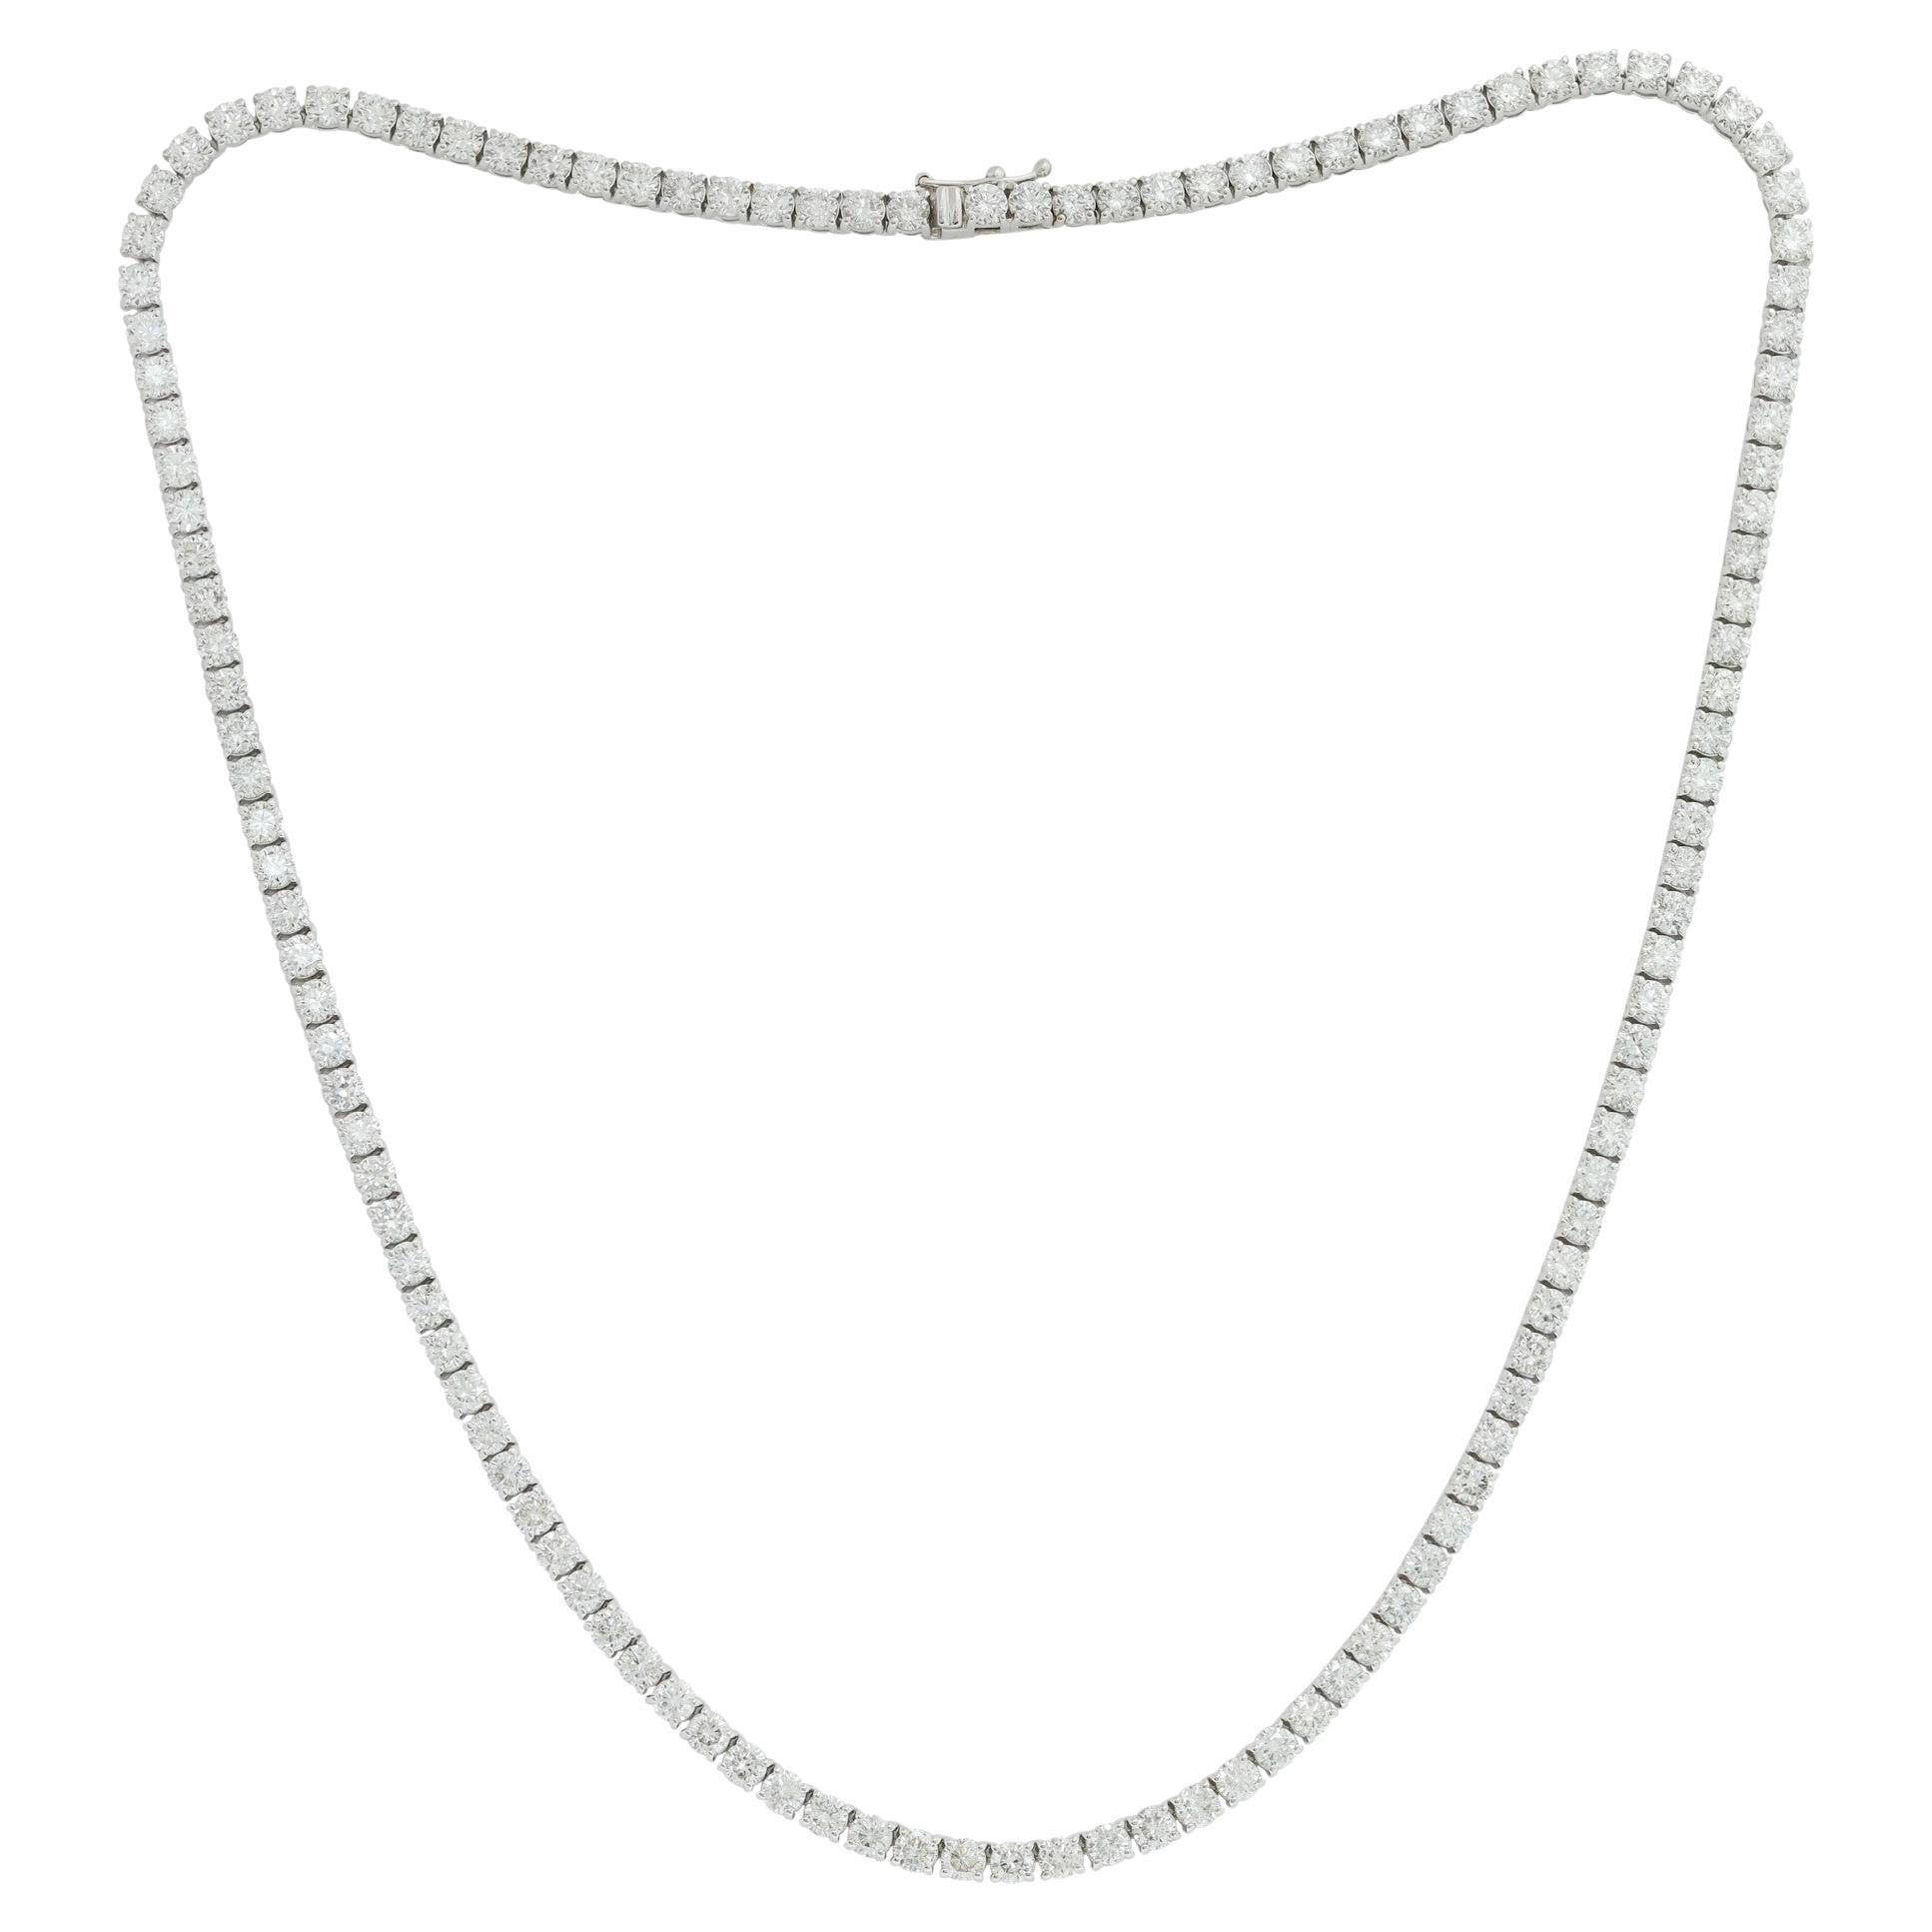 Diana M. Custom 11.06 Cts Round Diamond 18k White Gold Tennis Necklace For Sale